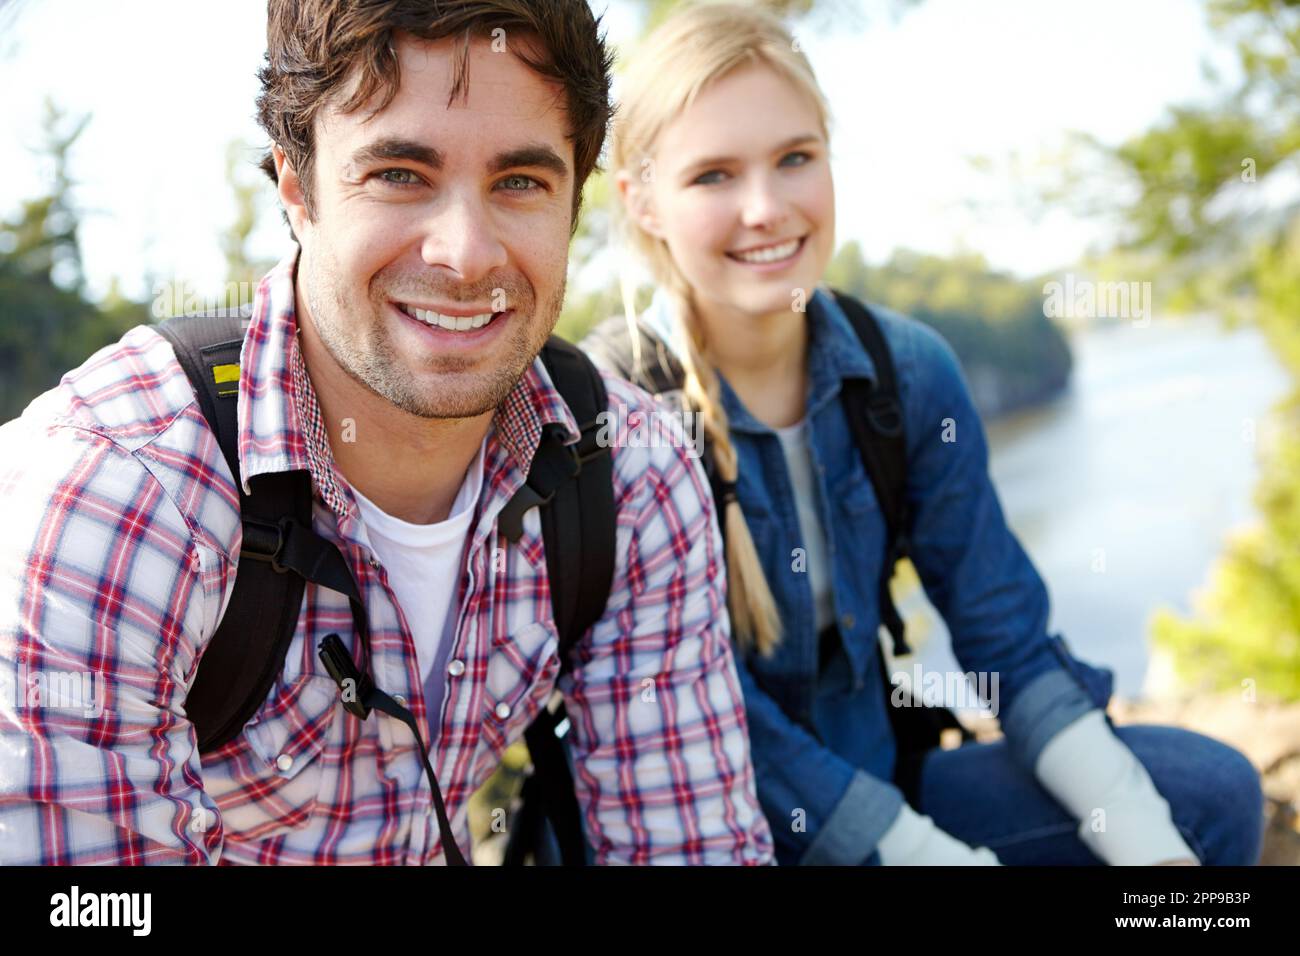 Im lucky shes an outdoorswoman. A handsome young man sitting out in nature with his girlfriend. Stock Photo